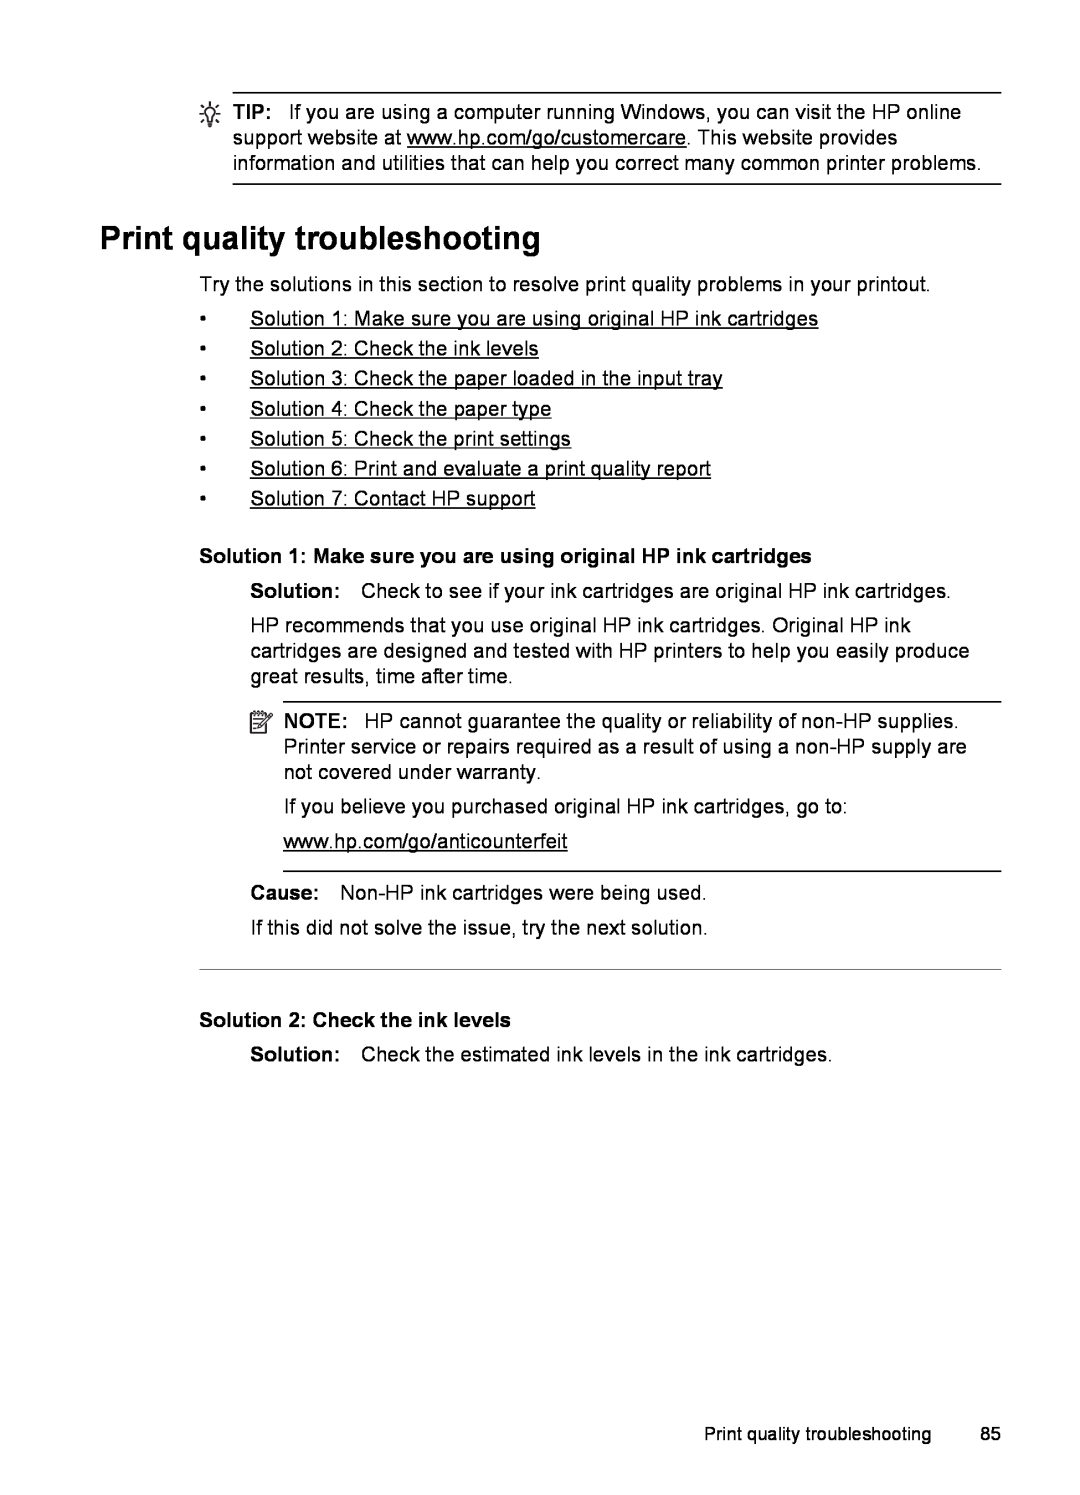 HP 6600 - H7 manual Print quality troubleshooting, Solution 1 Make sure you are using original HP ink cartridges 